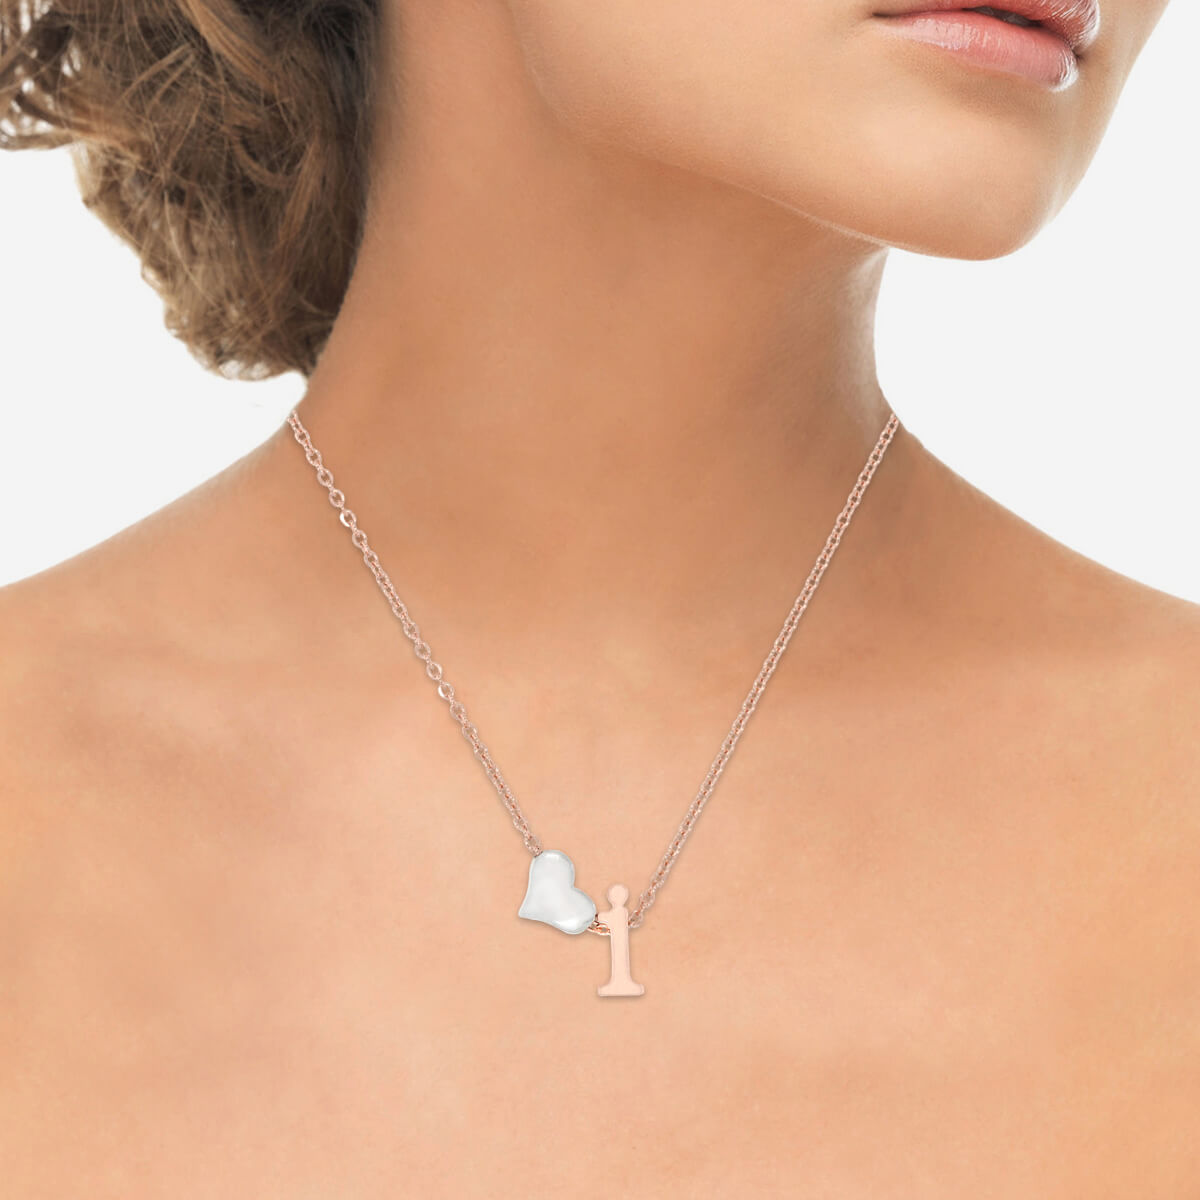 Sterling Silver "I" Initial Necklace